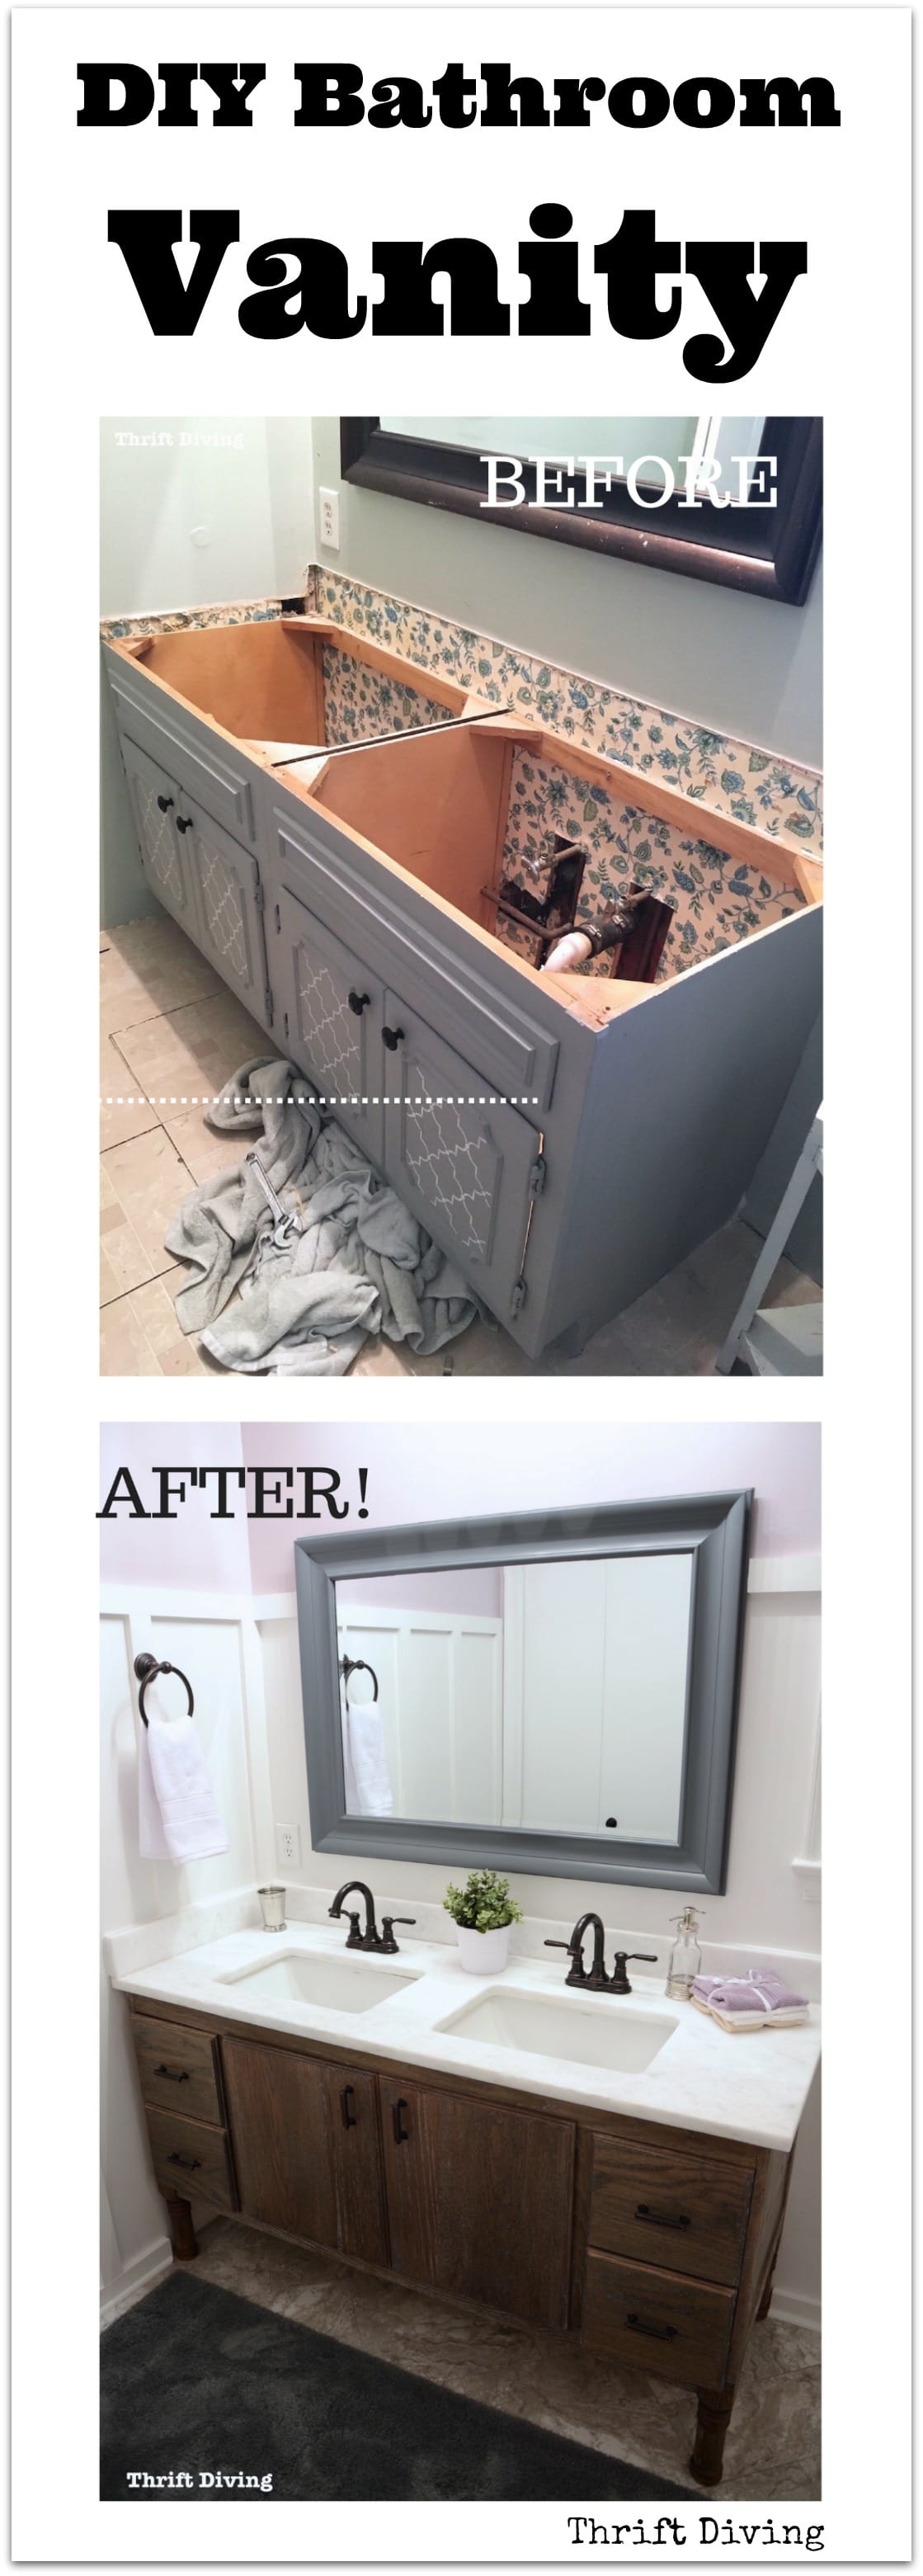 How To Build A 60 Diy Bathroom Vanity, Can You Make Your Own Bathroom Vanity